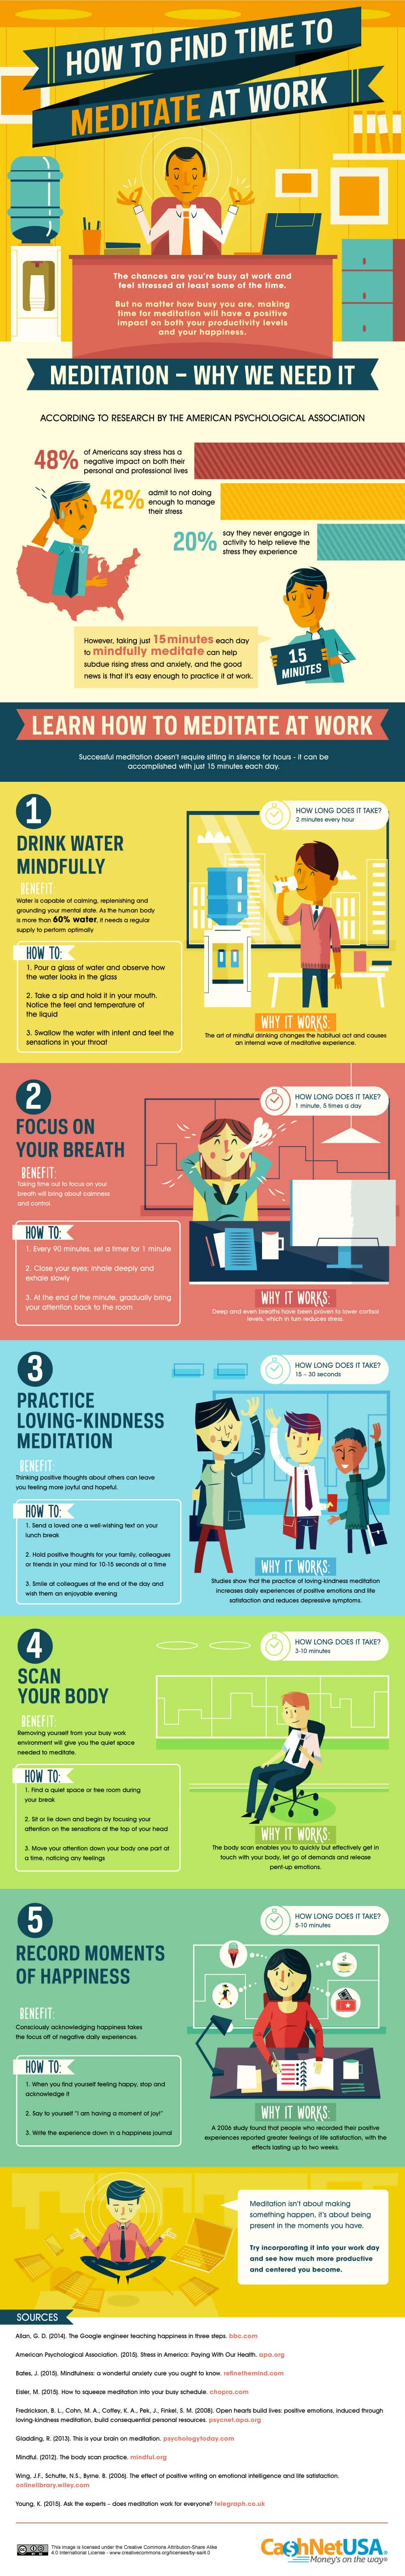 How to Find Time to Meditate At Work - #infographic